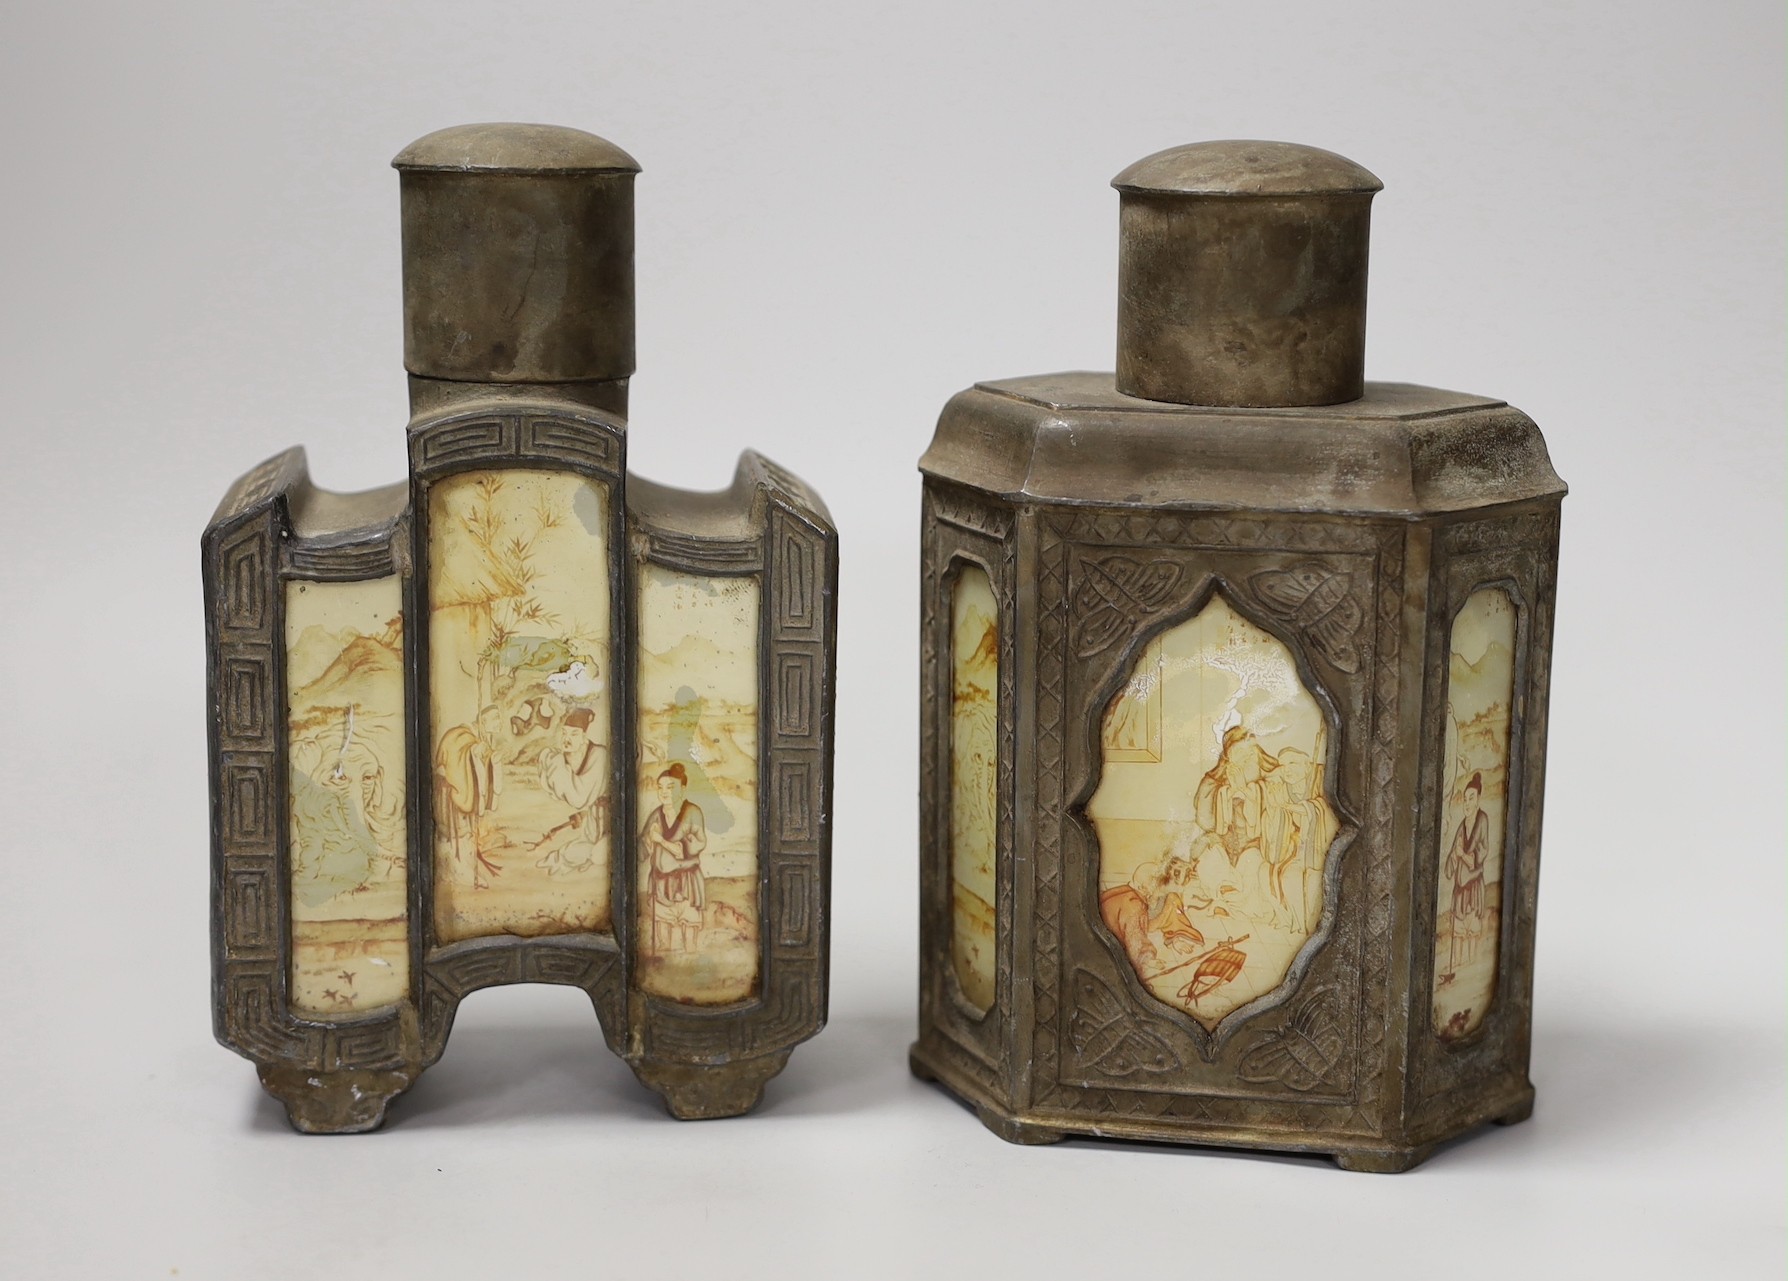 Two Chinese pewter tea caddies with glass panelled decoration. 18cm high